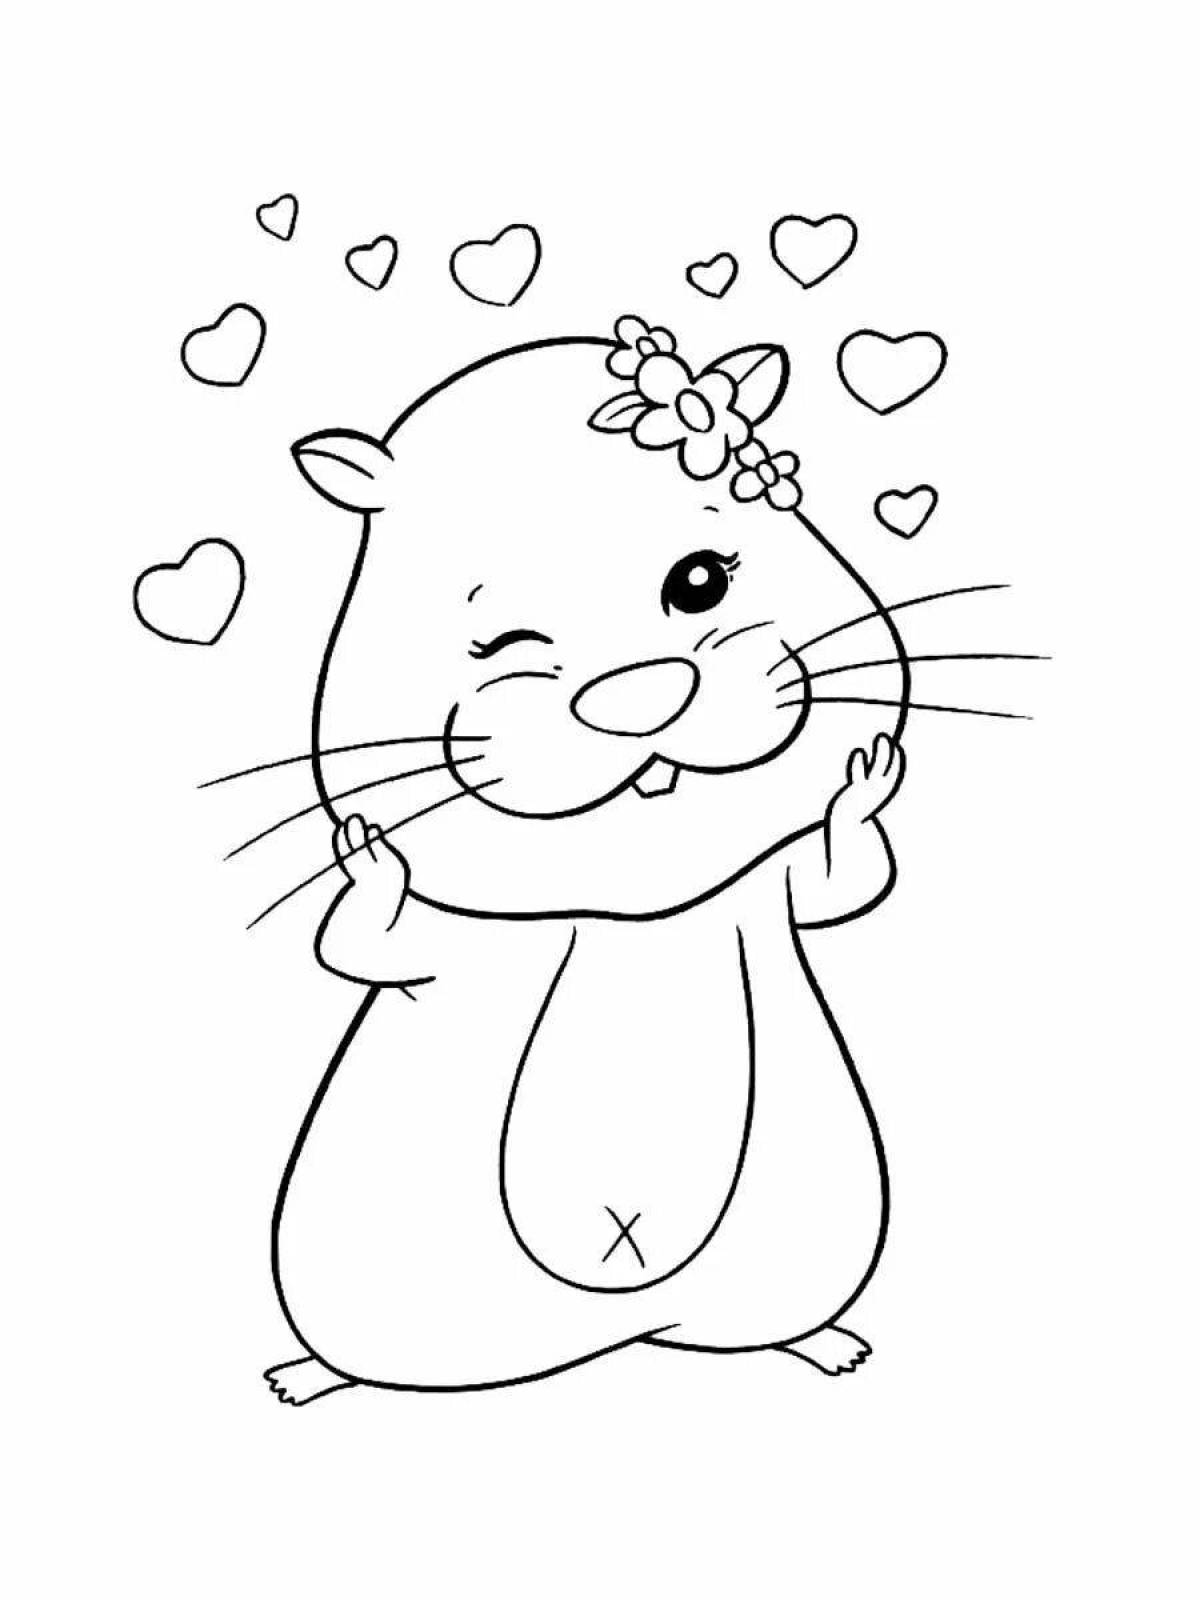 Fluffy hamster coloring book for kids